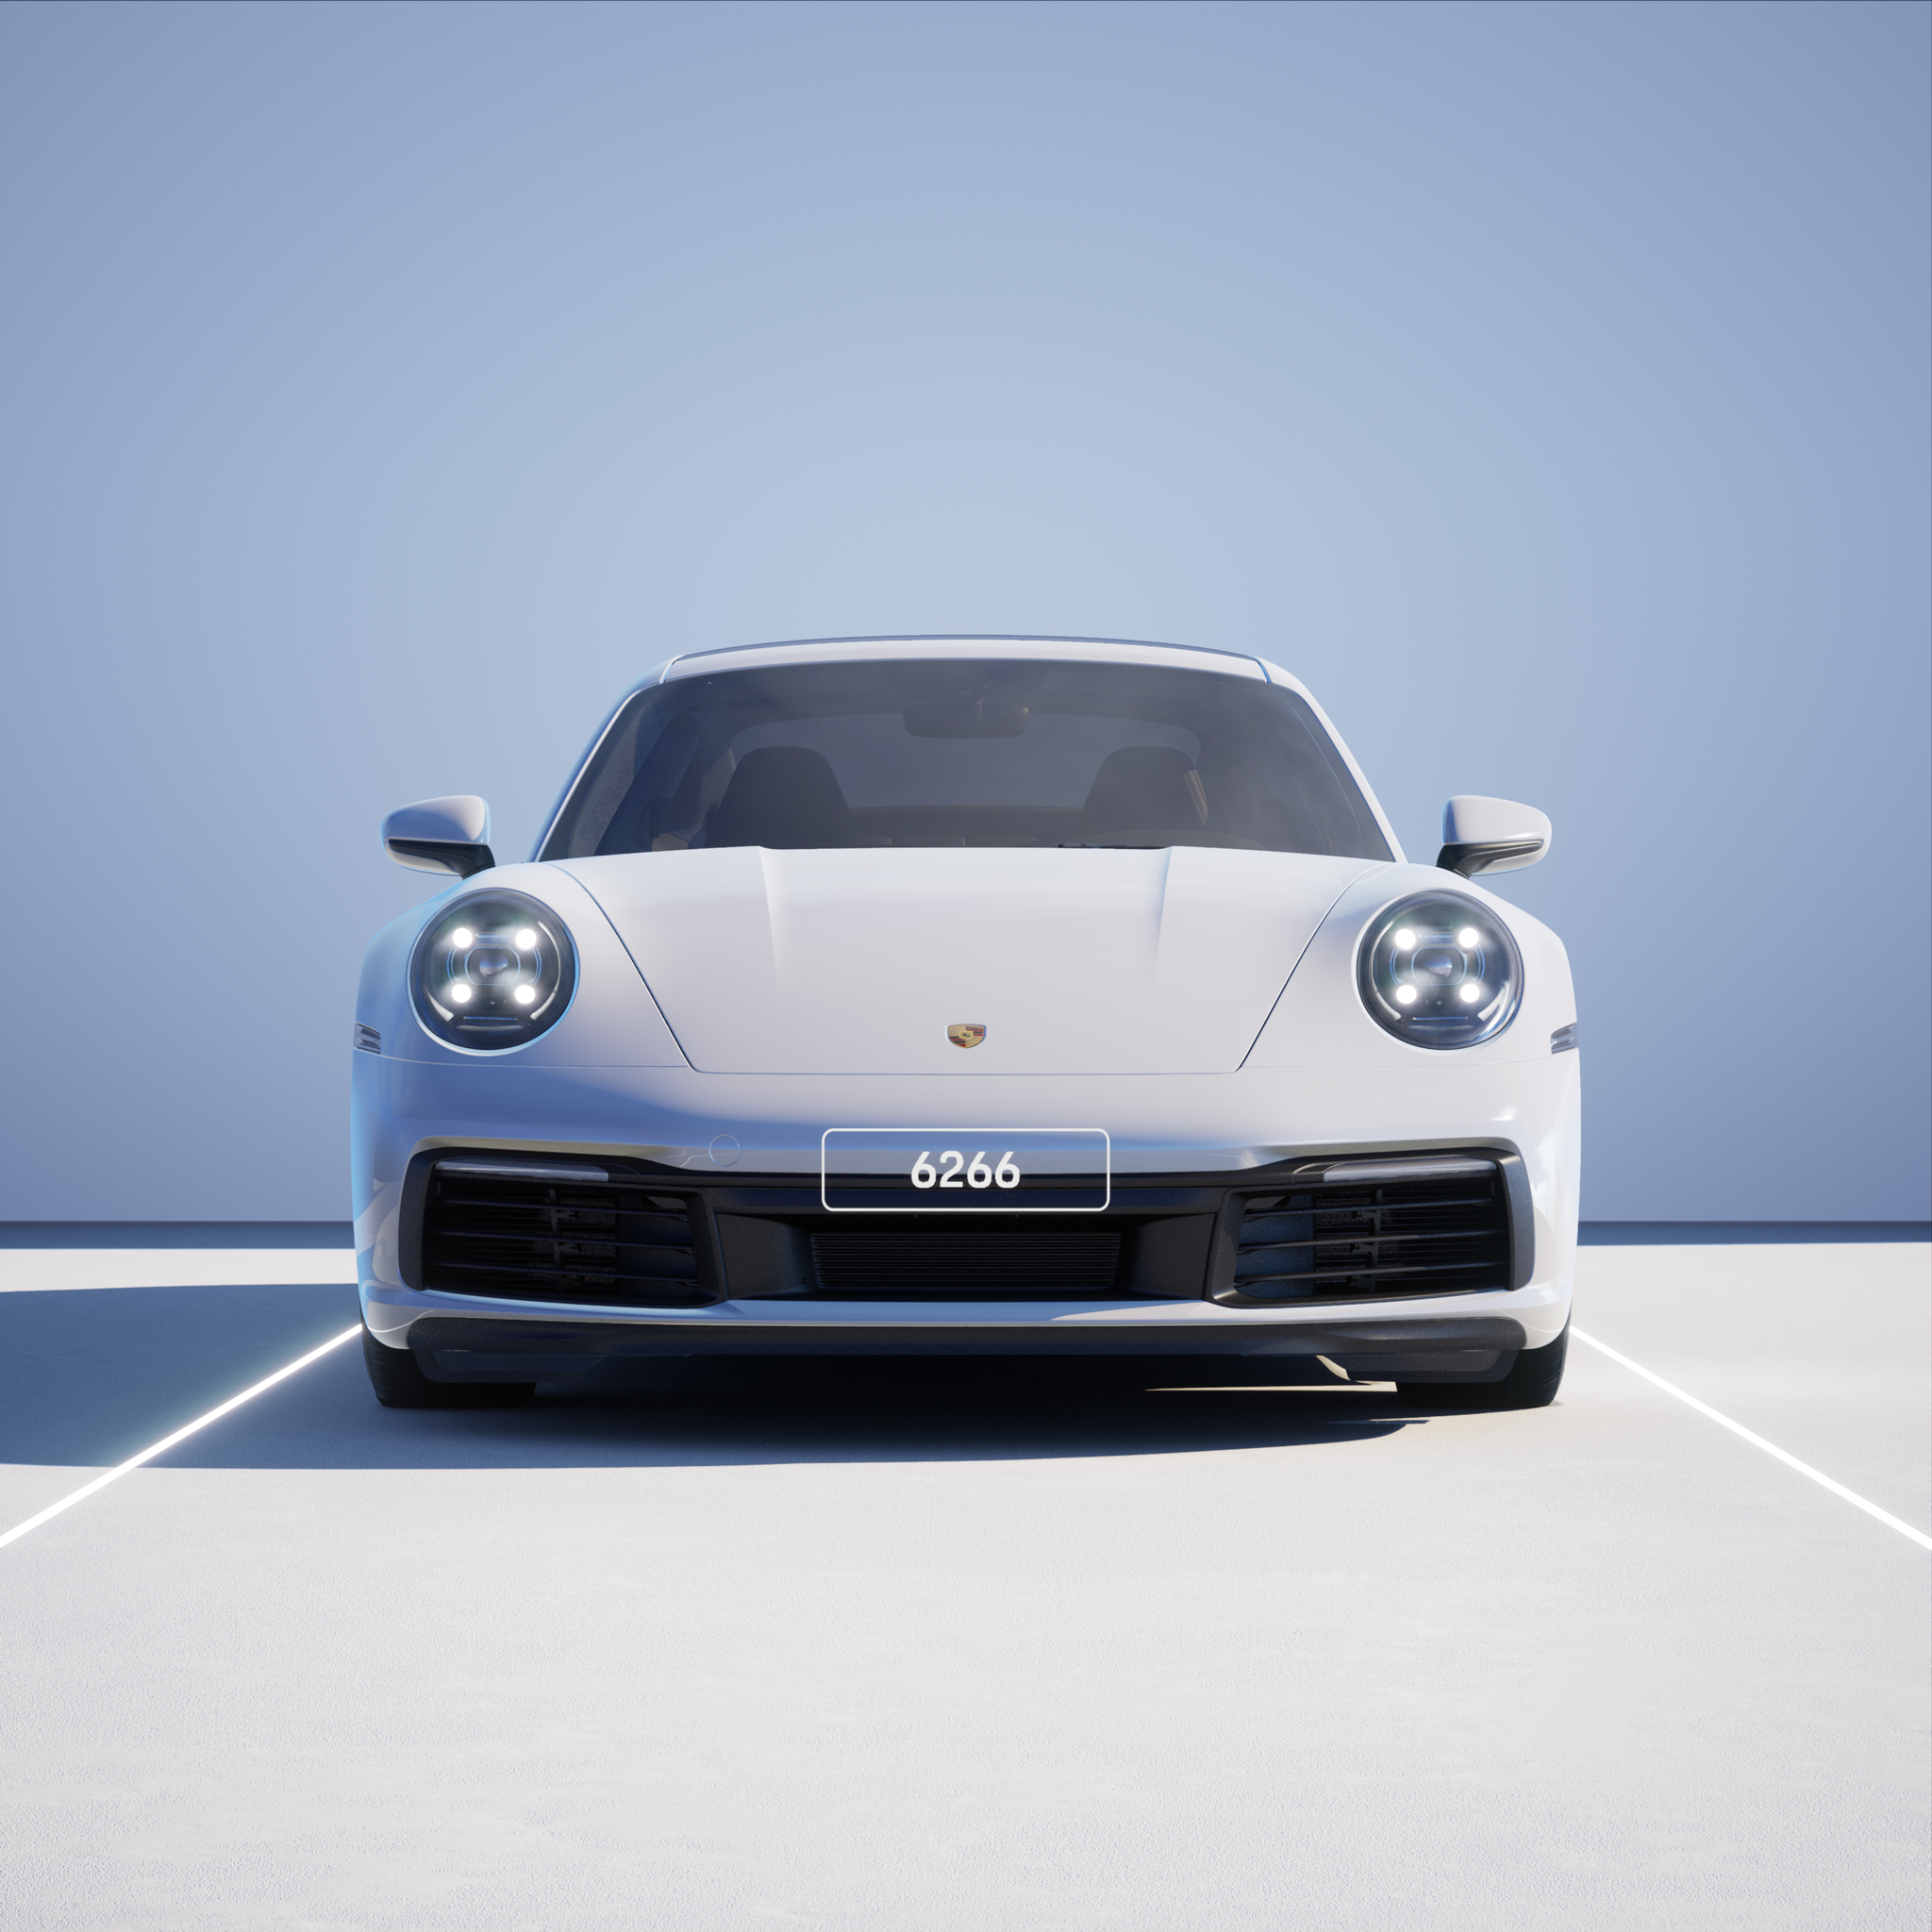 The PORSCHΞ 911 6266 image in phase